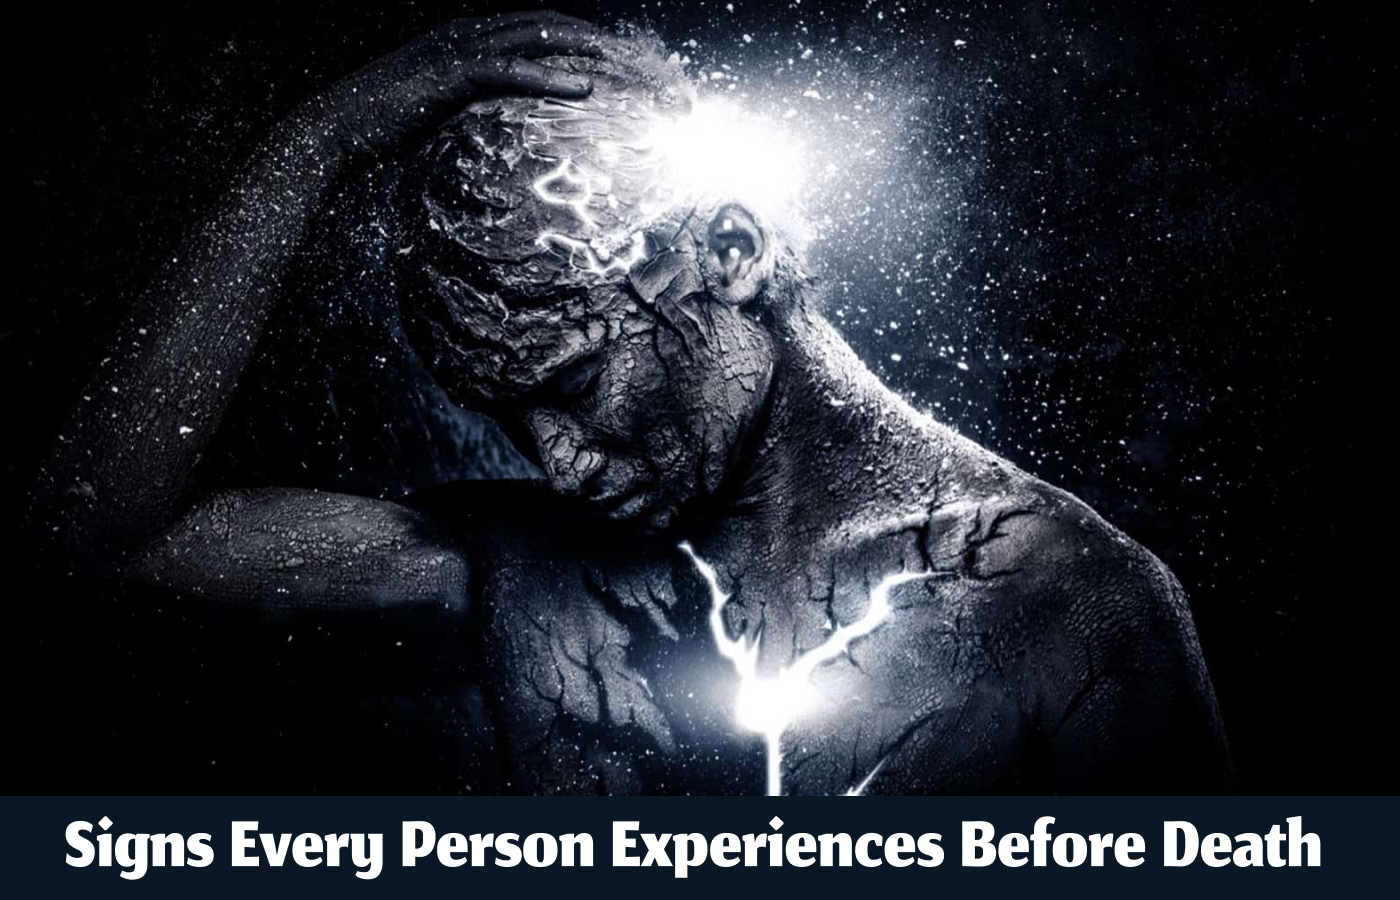 Lord Vishnu reveals these signs every person experiences before death